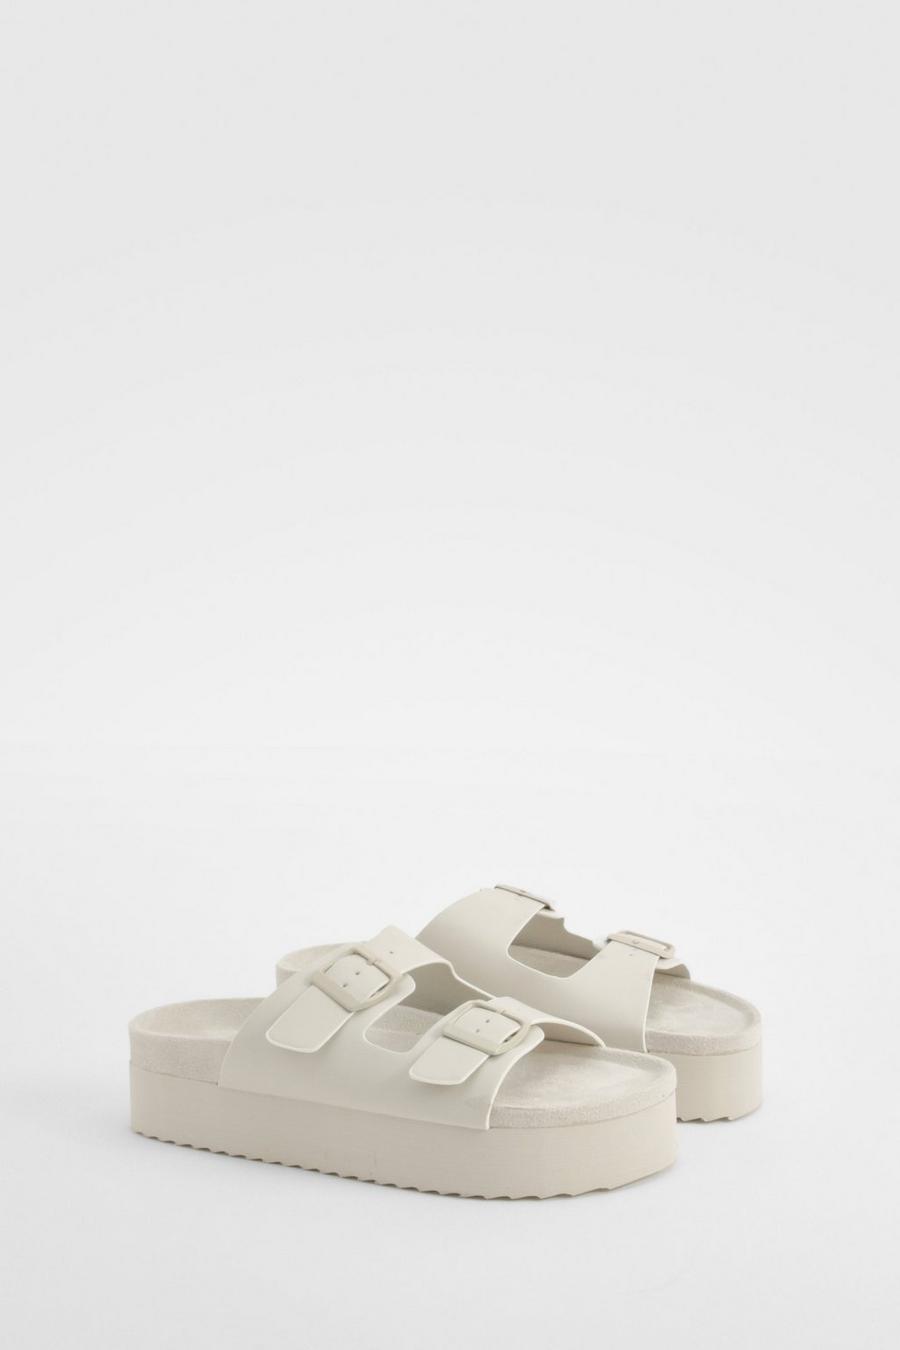 White Platform Double Strap Footbed Buckle Sliders    